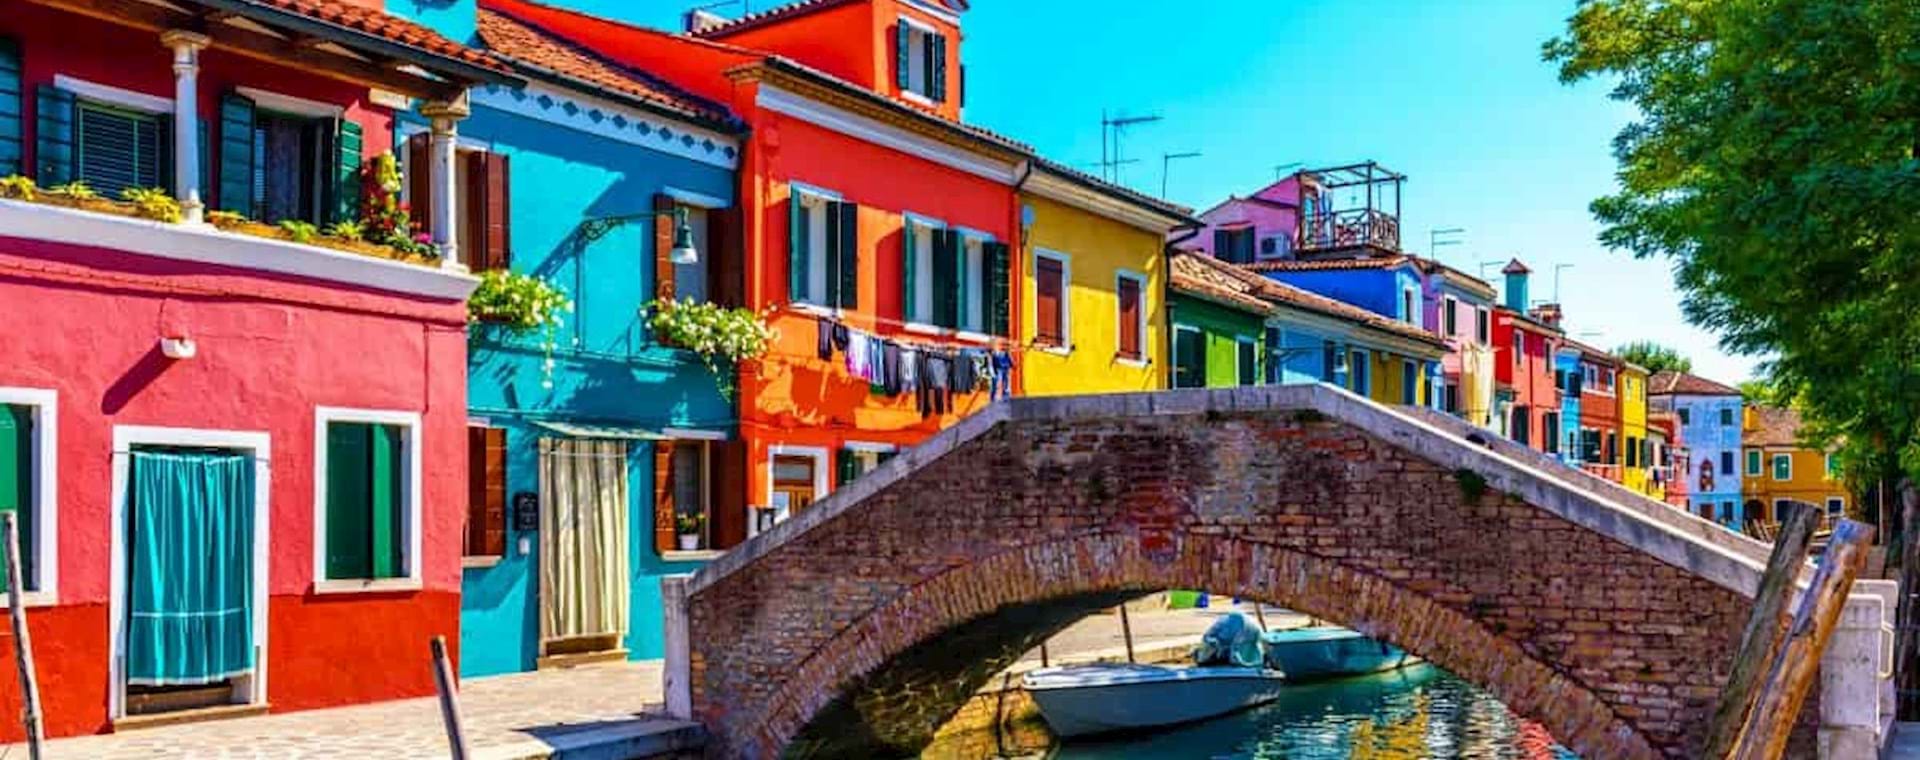 stunning view of Burano's canal